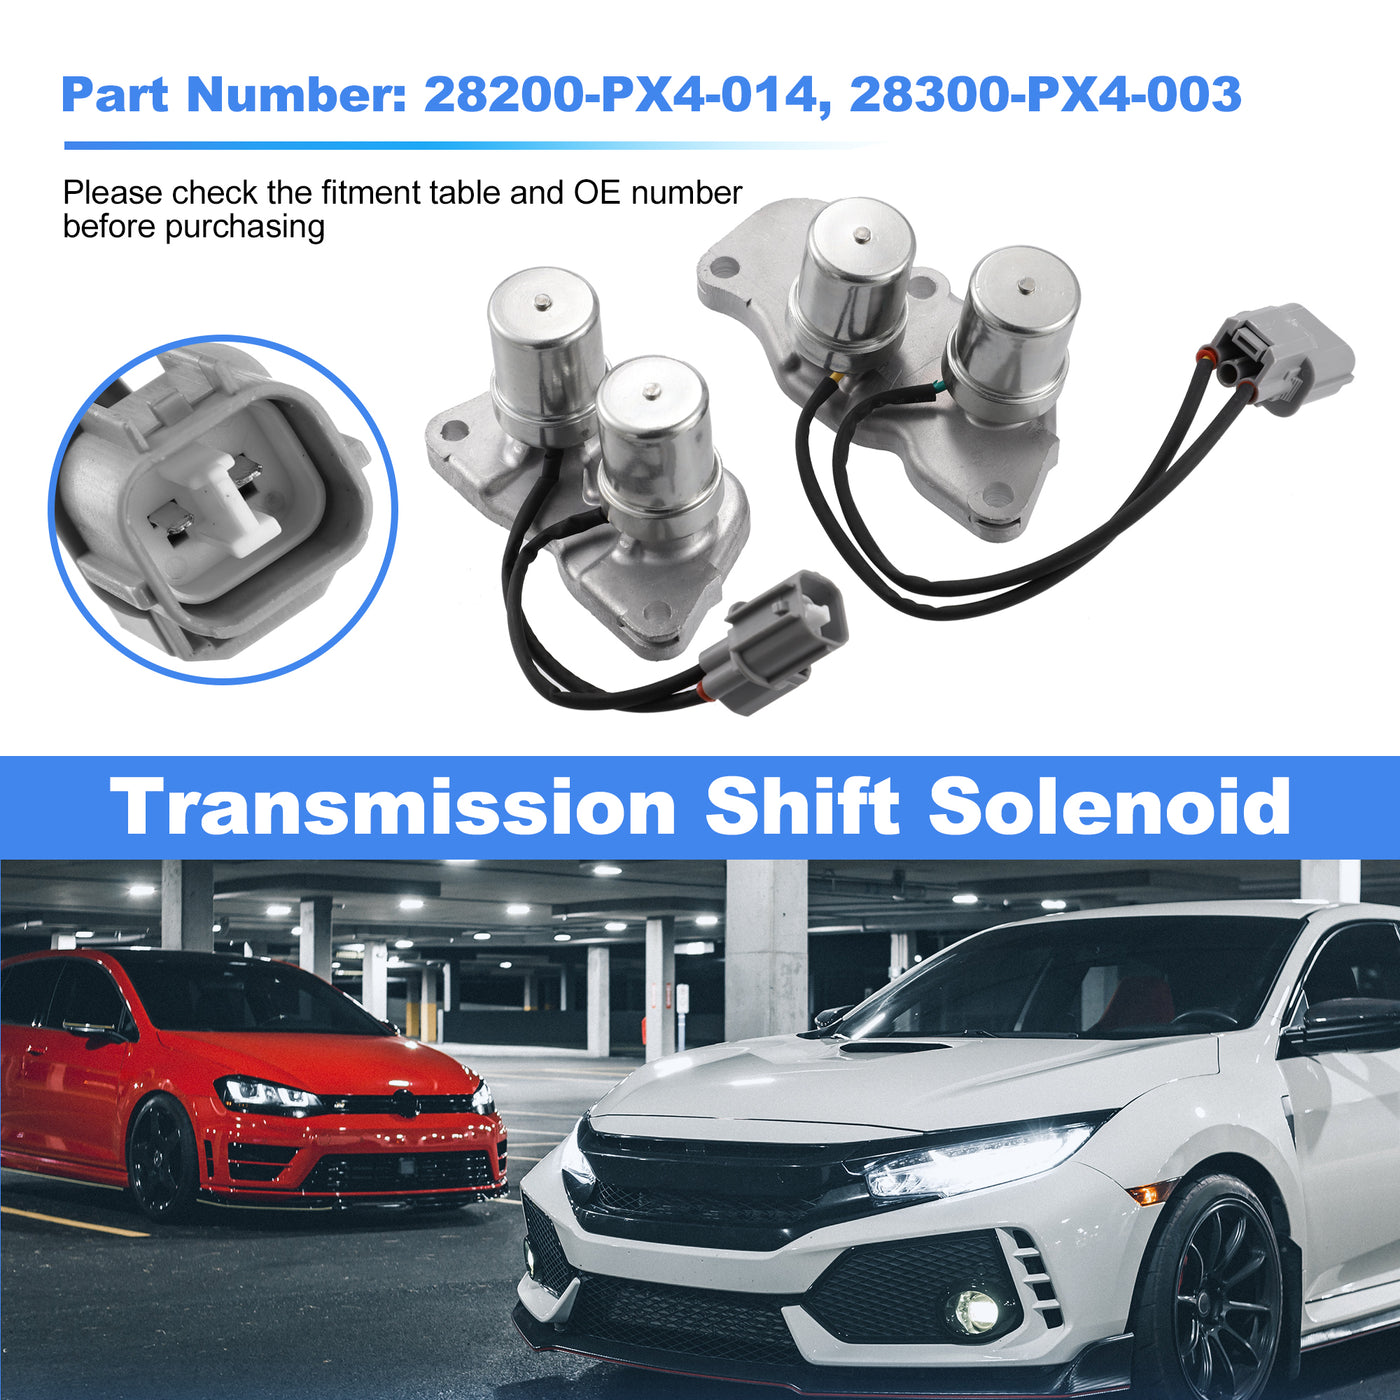 X AUTOHAUX 1 Set 28200-PX4-014 28300-PX4-003 Transmission Shift Solenoid for Honda Accord 1990-1997 for Honda Odyssey 1995-1997 for Honda Prelude 1992-1996